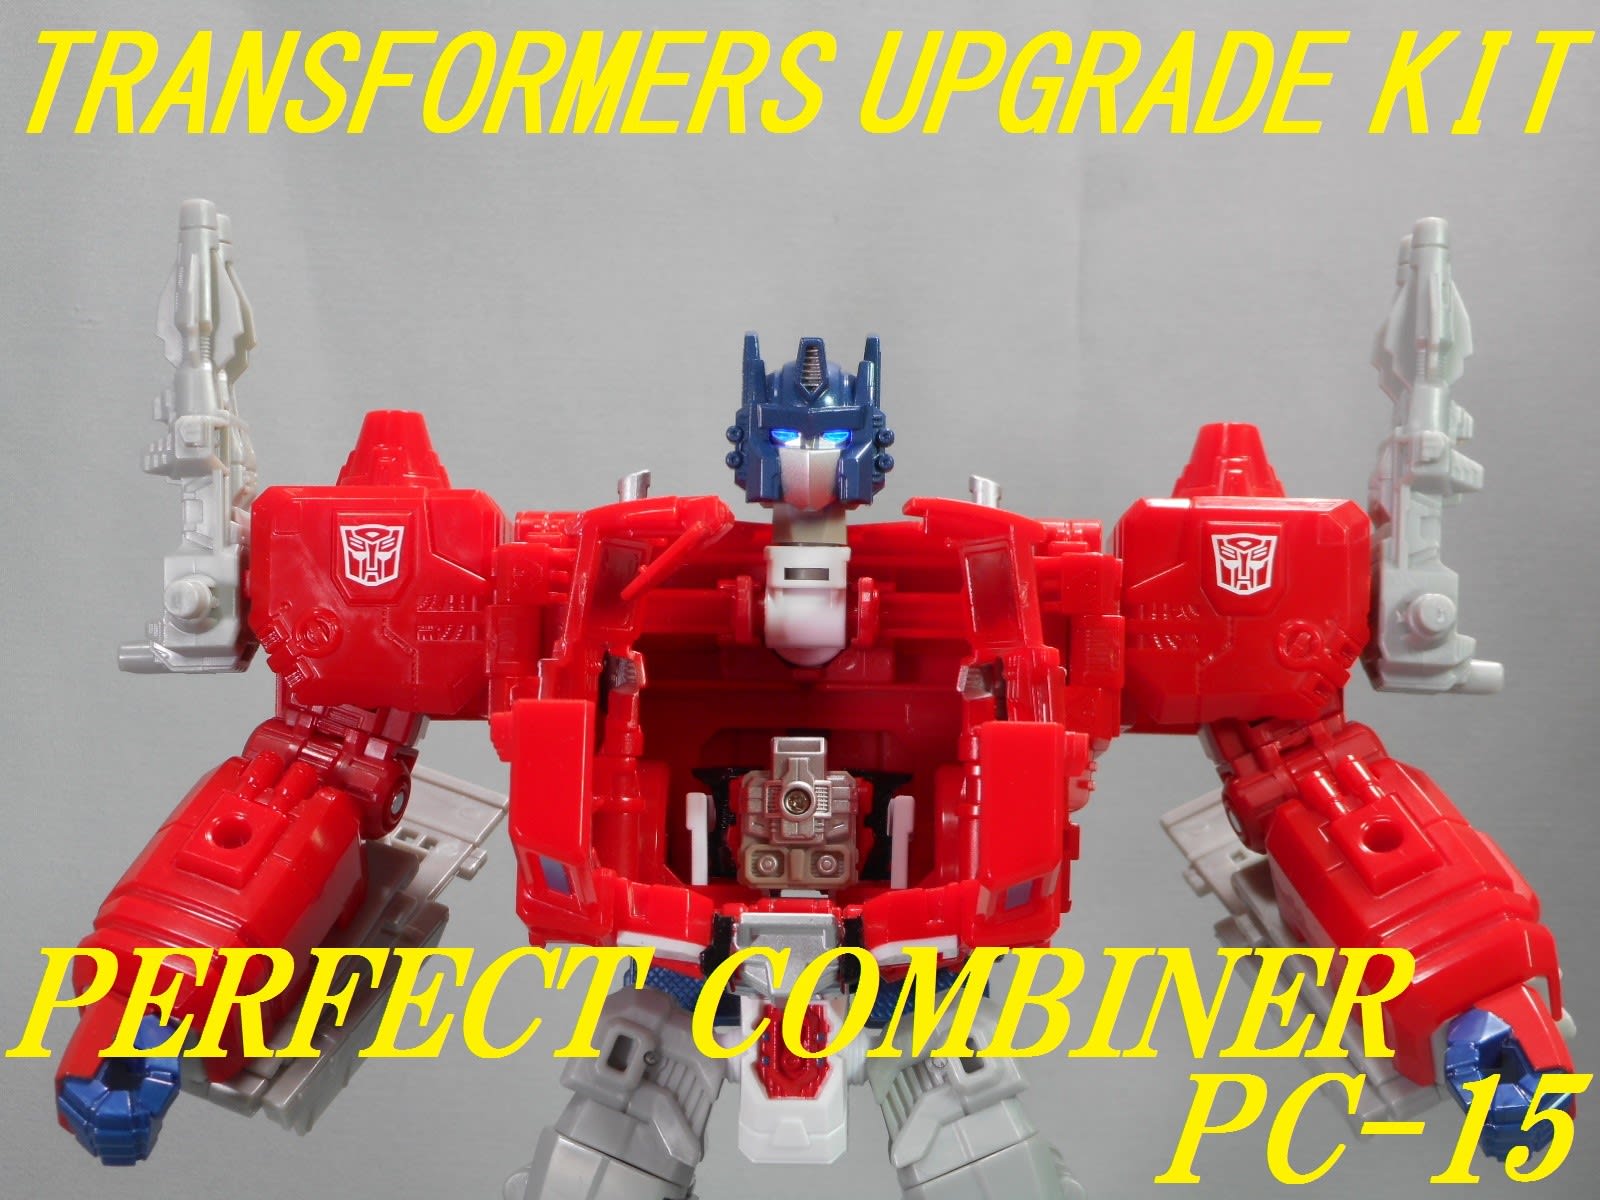 Transformers Perfect Effect Combiner PC-18 PC-15 Upgrade Kits Set NEW